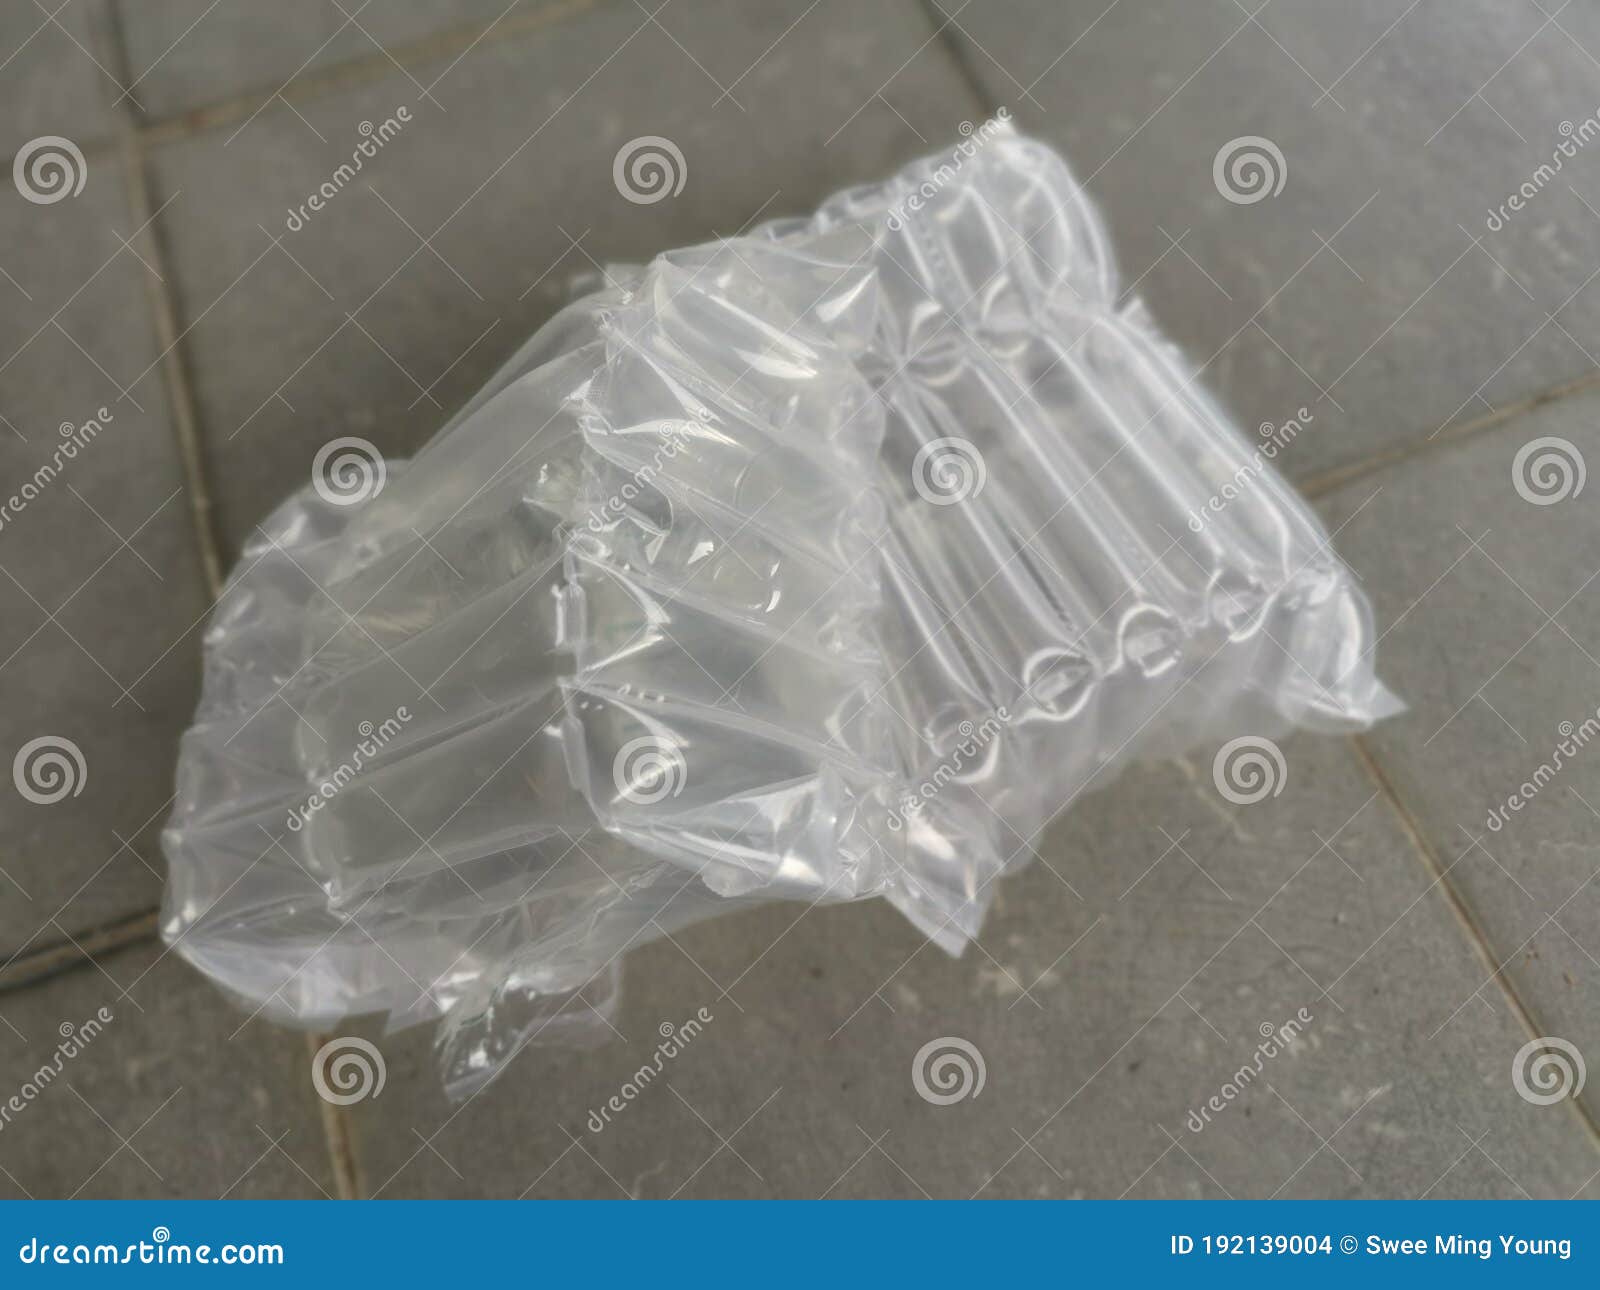 Inflatable Plastic Air Bags for Protective Parcel Wrapping Stock